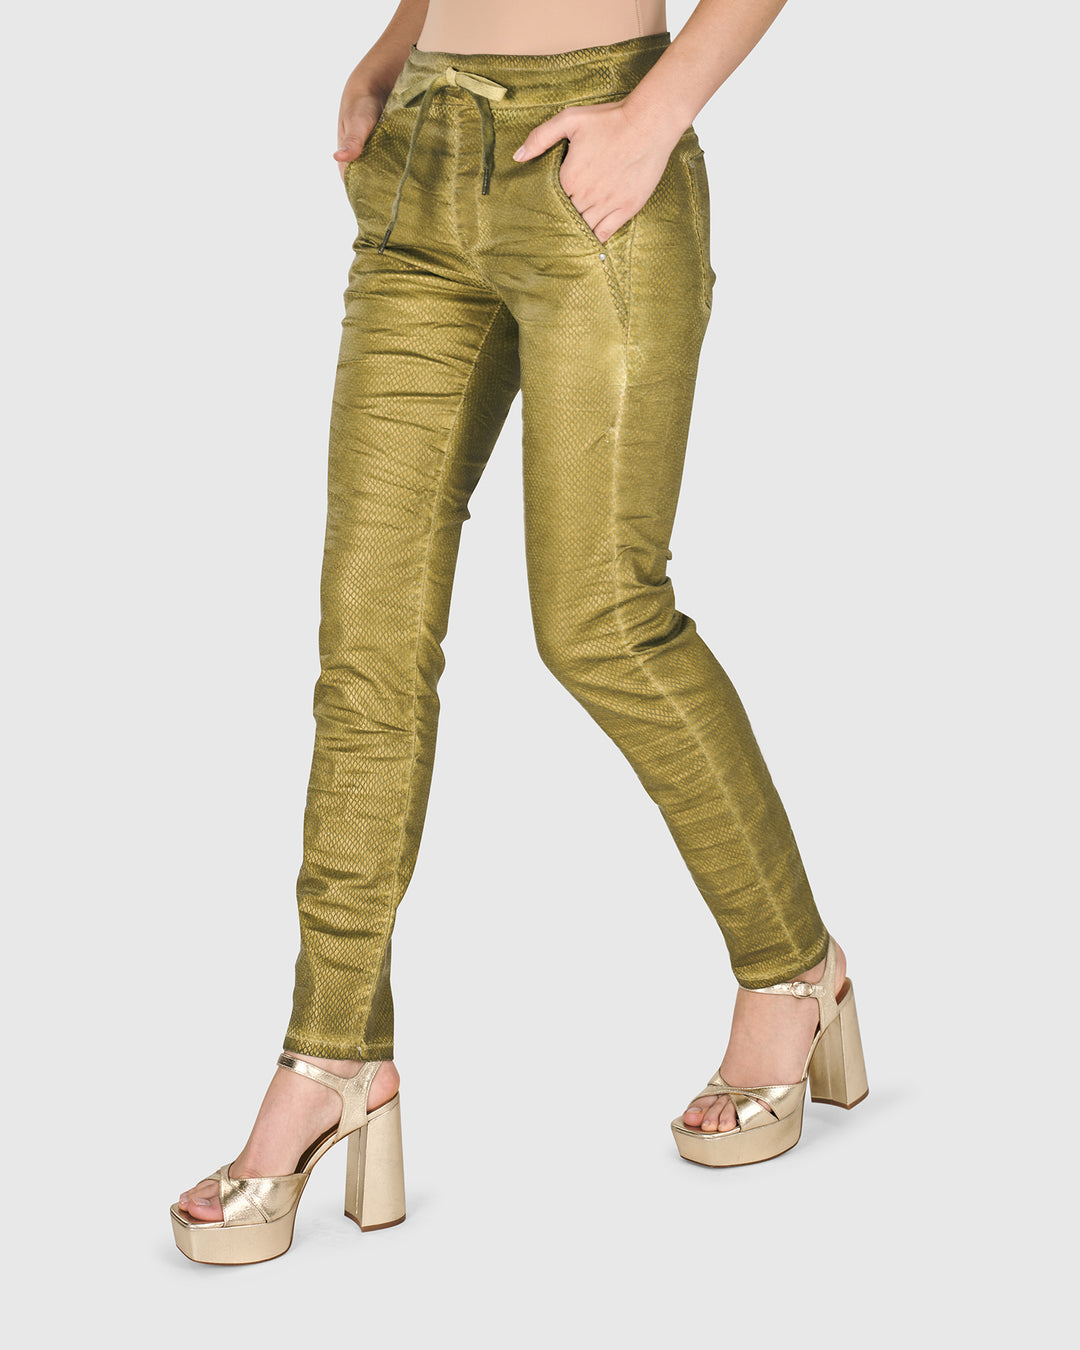 Iconic Stretch Jeans, Green Snake